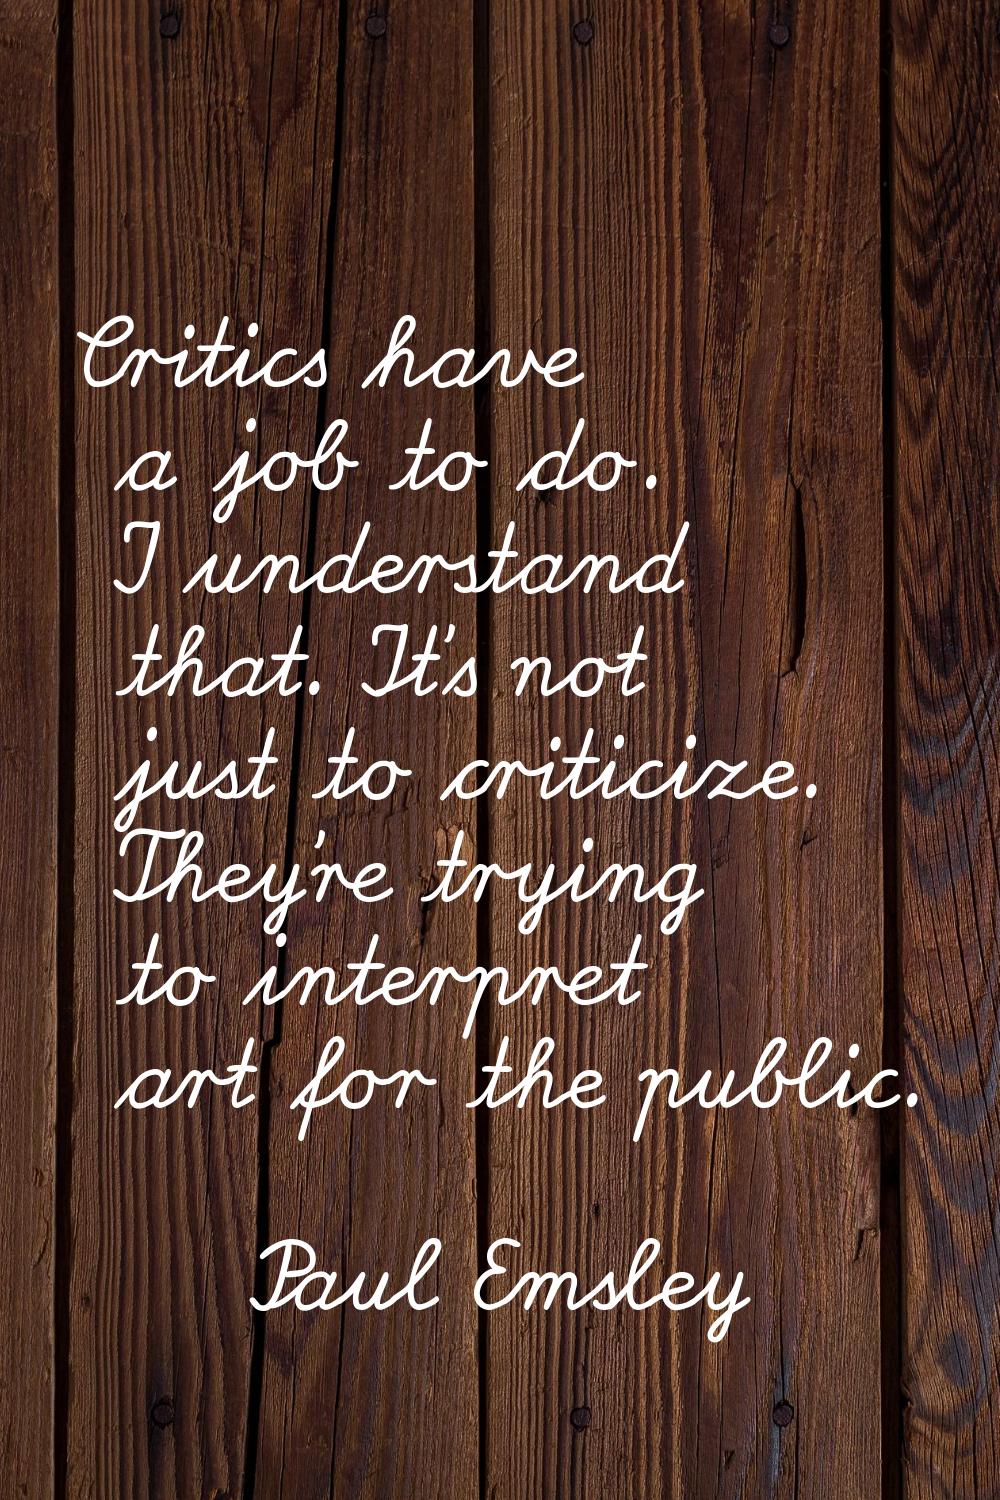 Critics have a job to do. I understand that. It's not just to criticize. They're trying to interpre